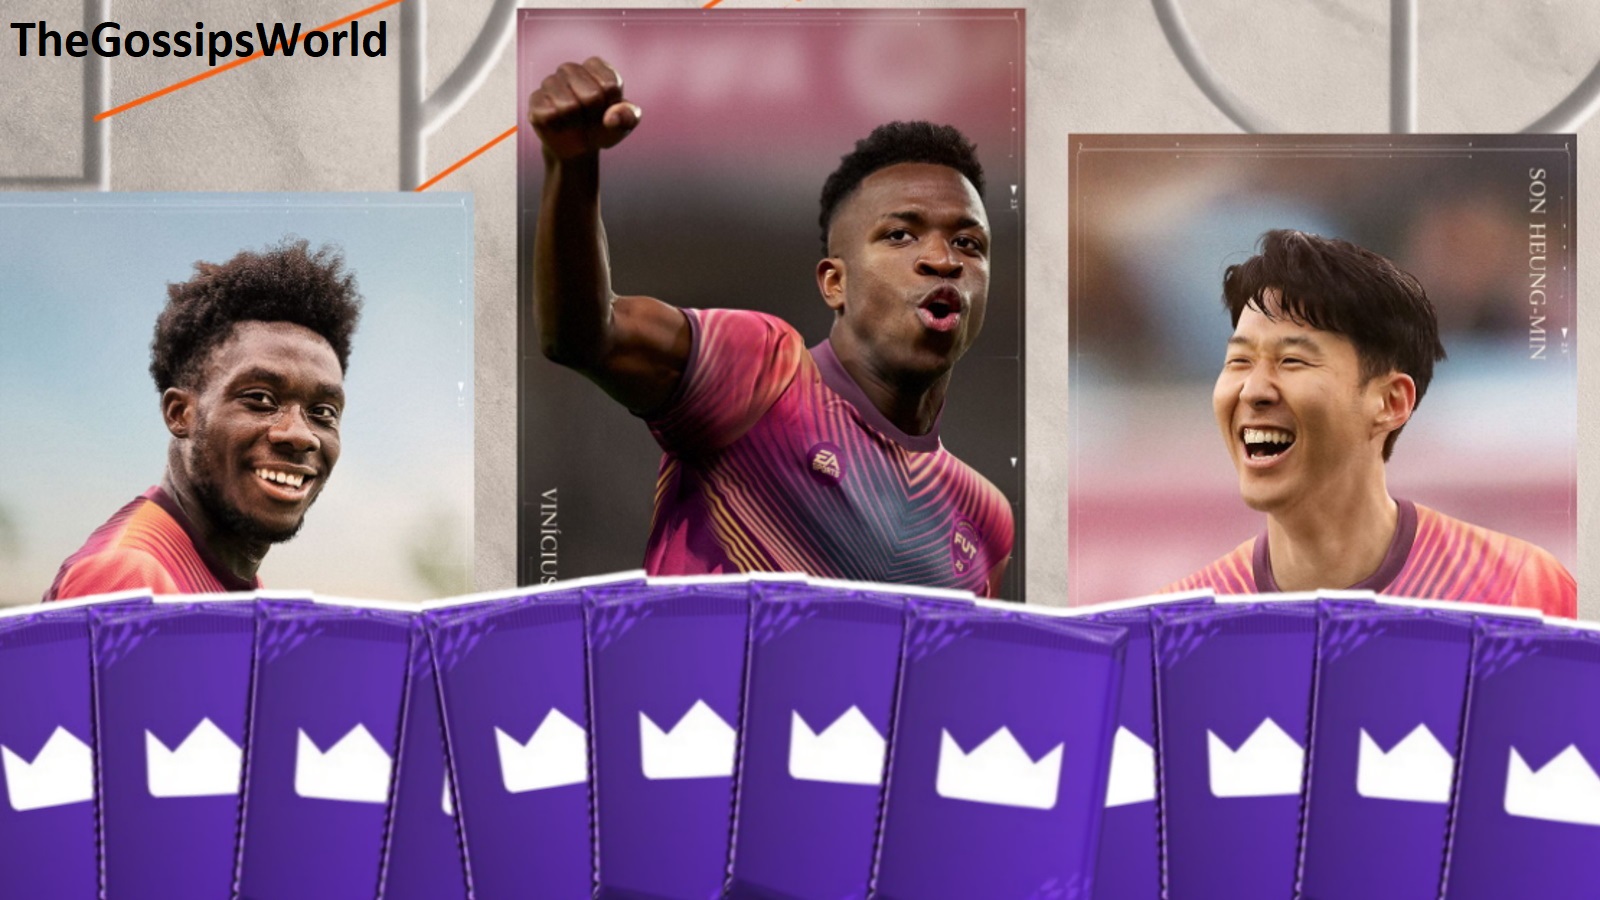 FIFA 23 Prime Gaming Rewards November 2022 Expected Release Date & Time